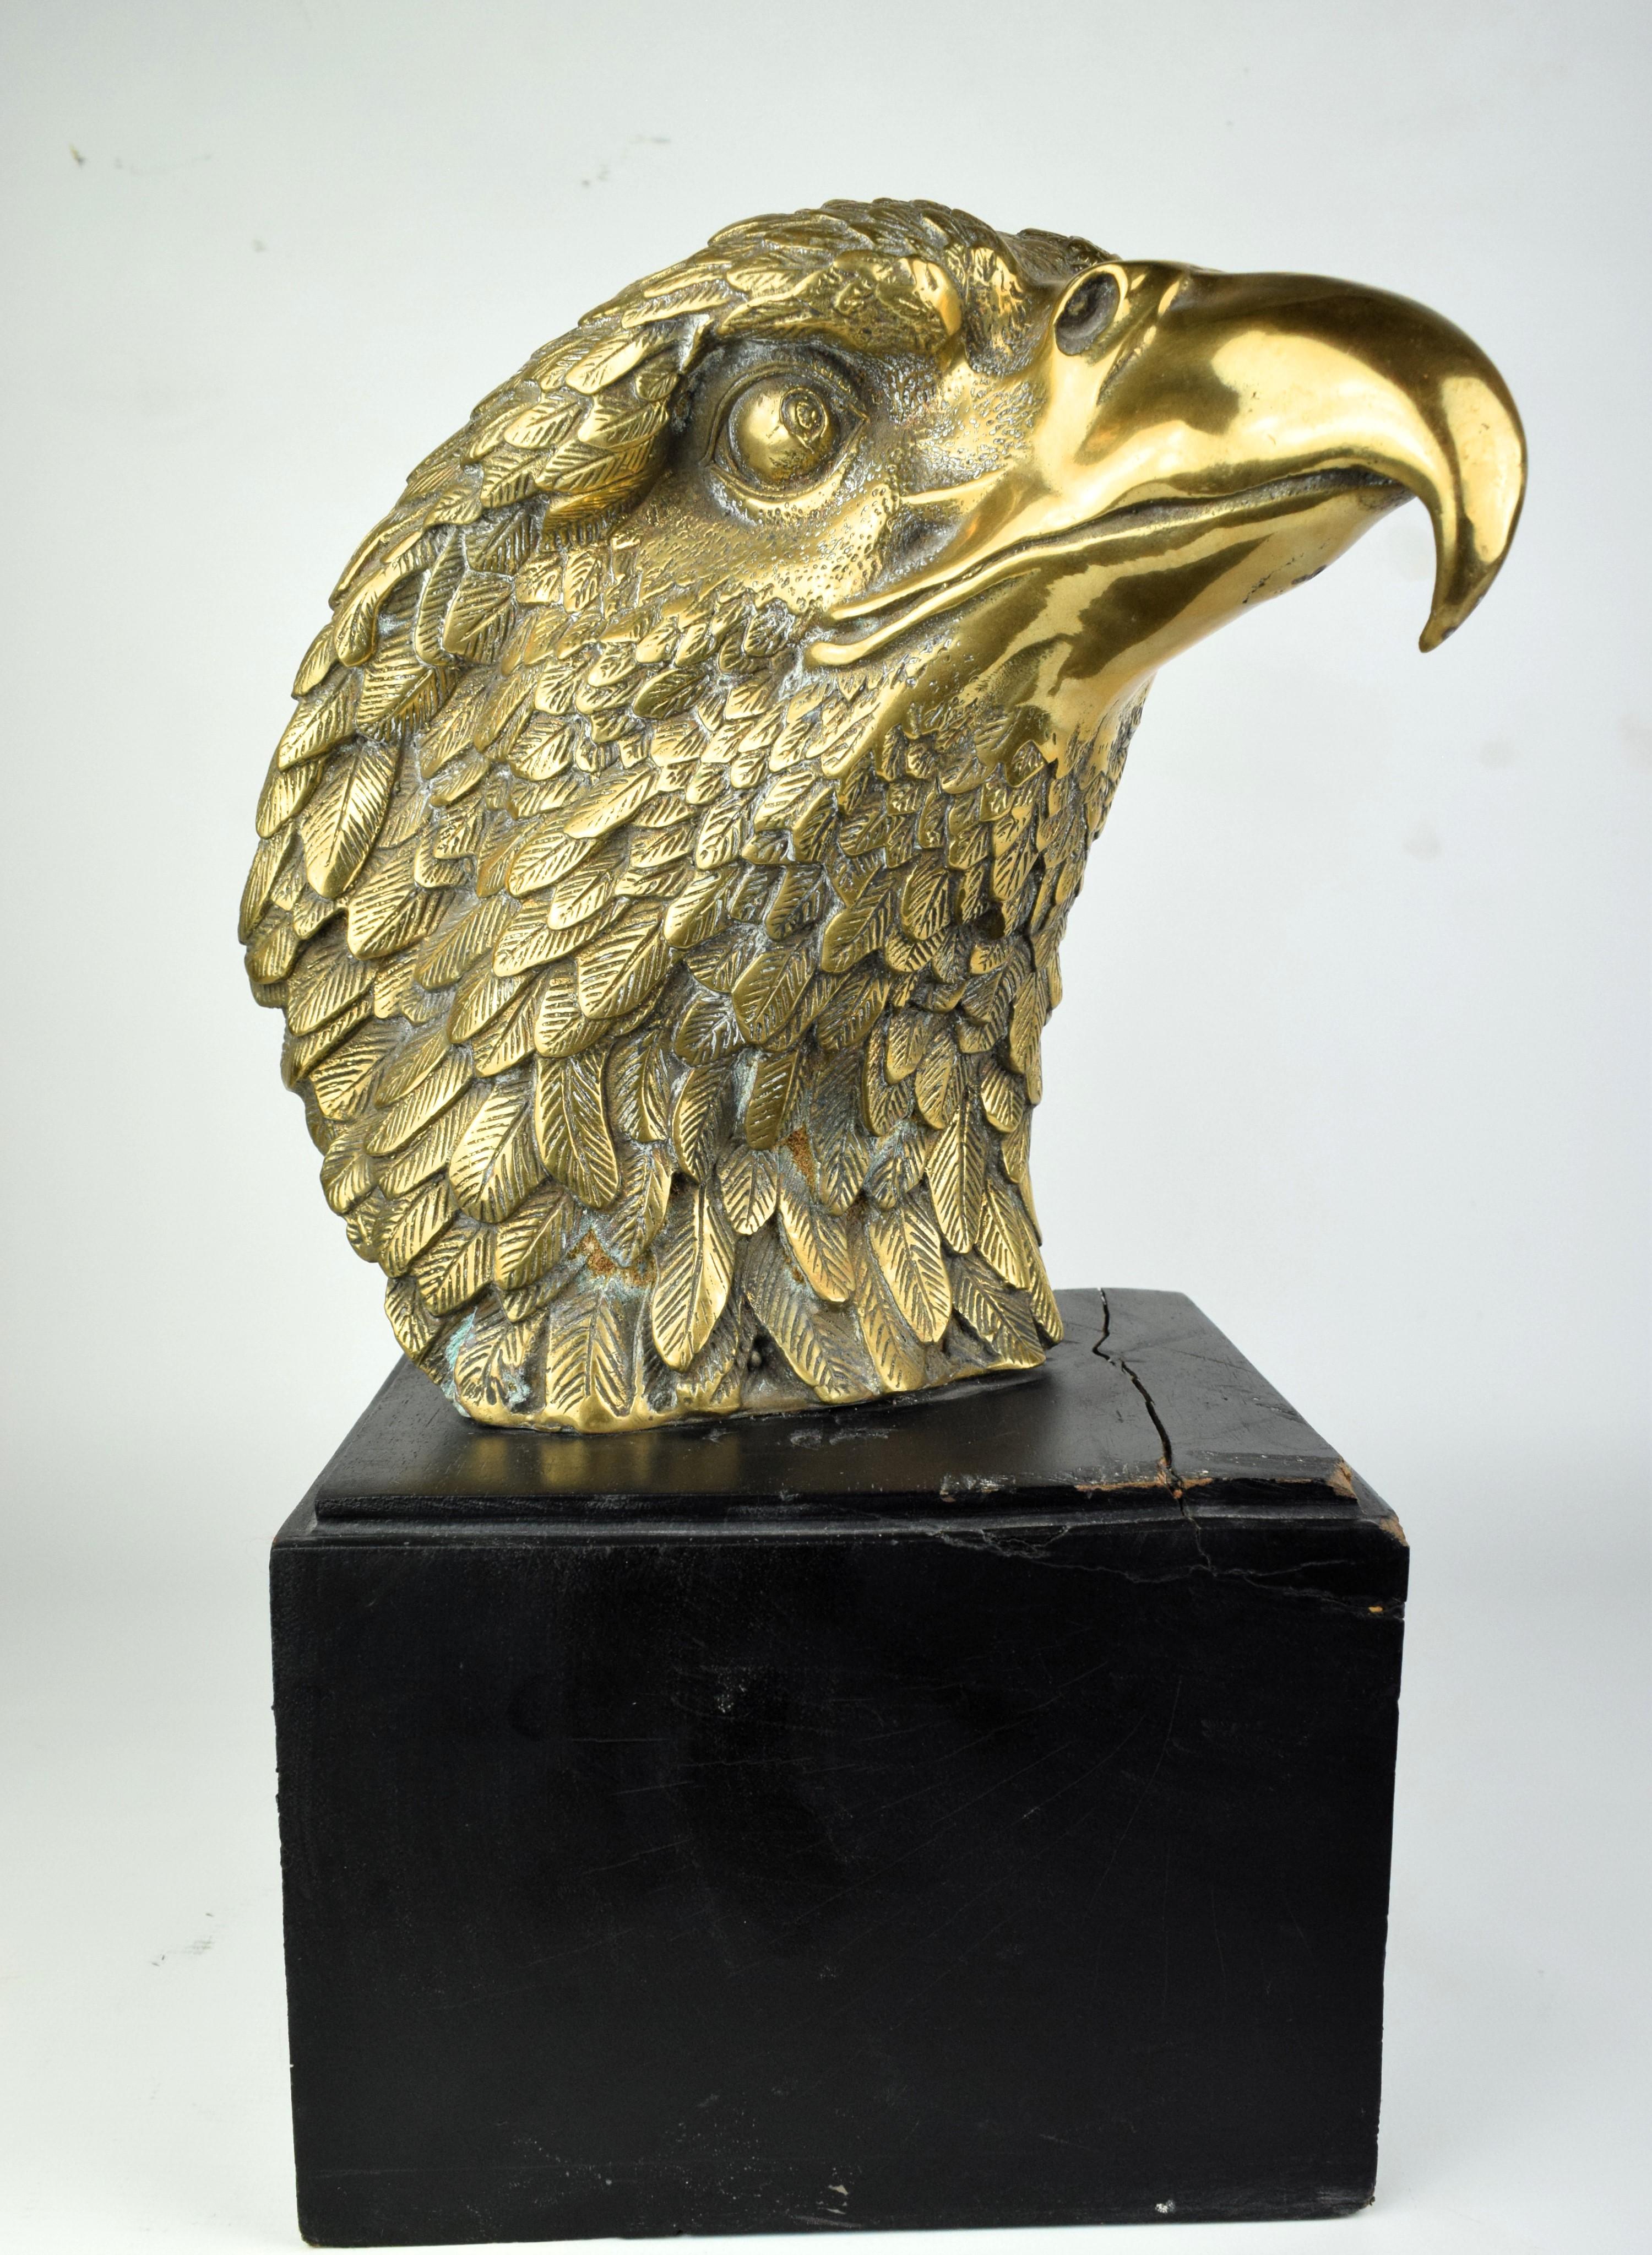 This brass eagle bust is a stunning and intricately crafted decorative sculpture of an eagle's head, made from brass. The eagle is a symbol of strength, freedom, and majesty, making it a popular subject for artistic representations. A brass eagle